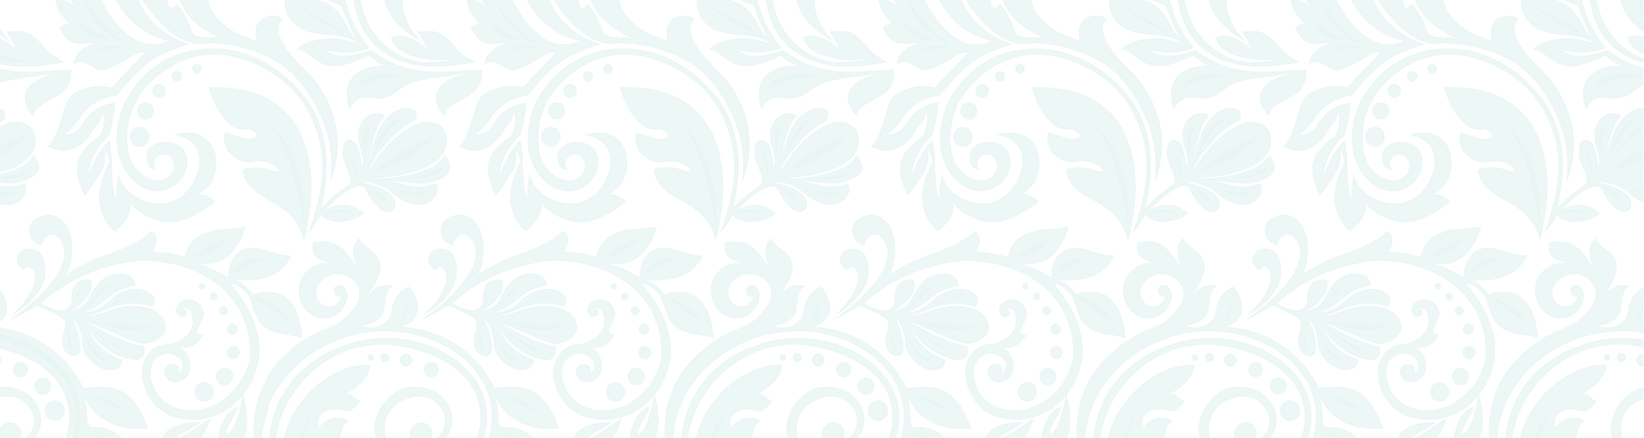 Background patteren in teal green